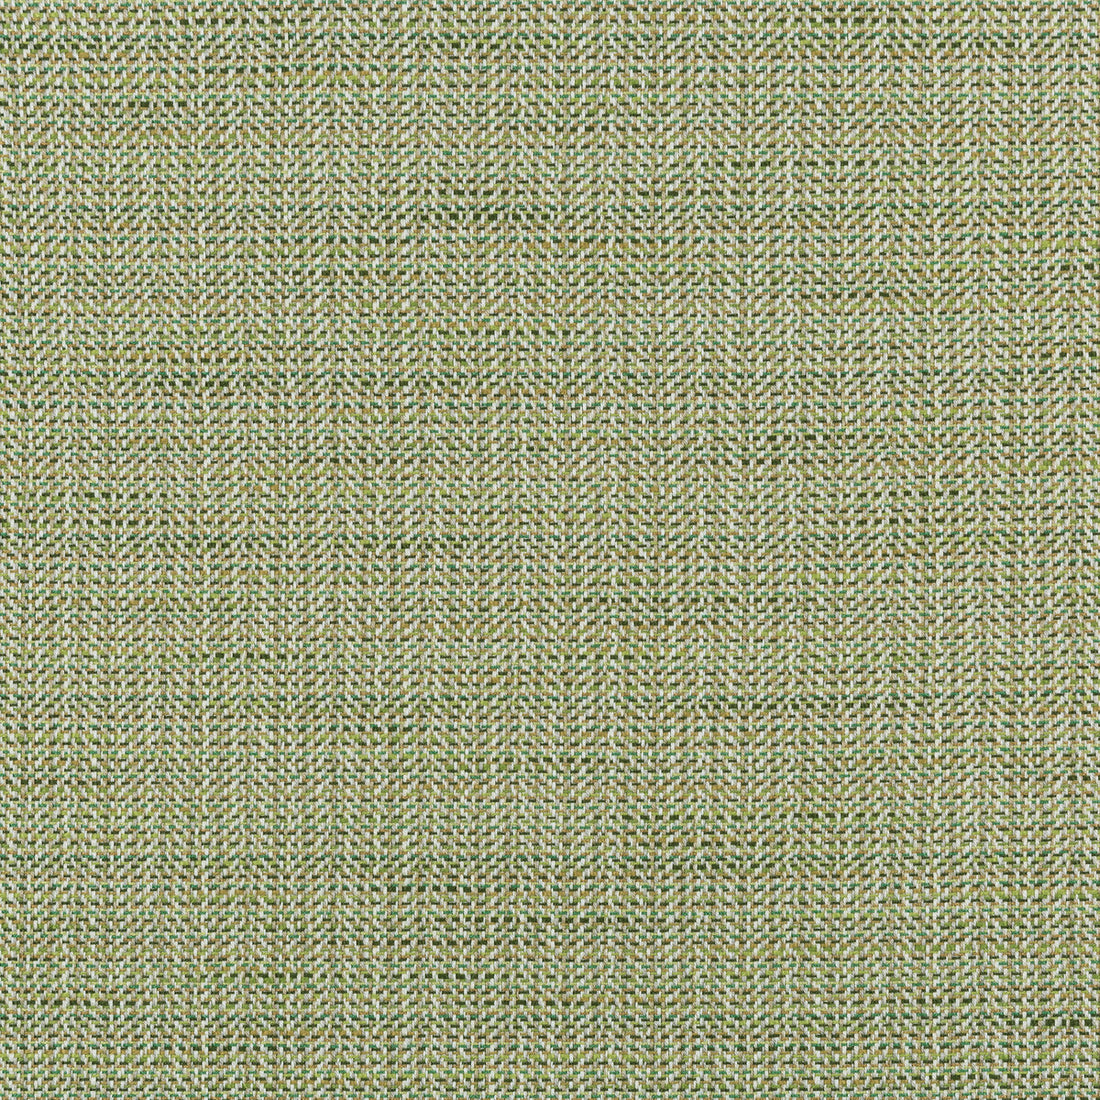 Kravet Smart fabric in 35963-314 color - pattern 35963.314.0 - by Kravet Smart in the Performance Crypton Home collection